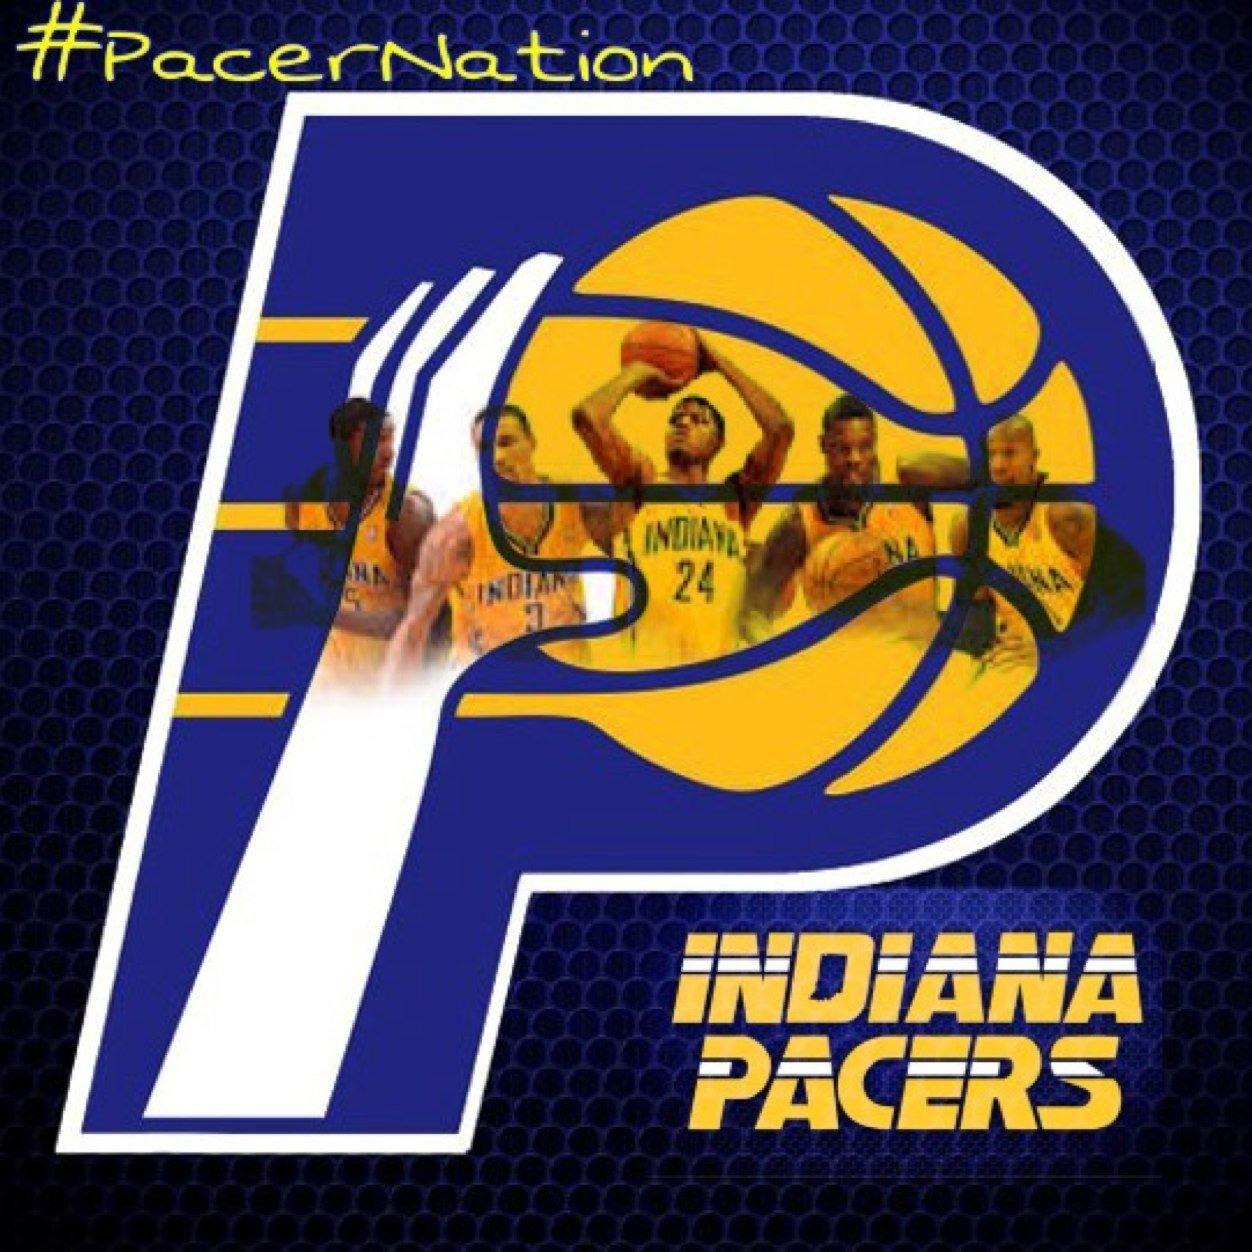 Indiana Pacer News! Keeping Pacer Fans On Top Of Everything!! #IndianaPacers #PacerNation #LetsGoPacers